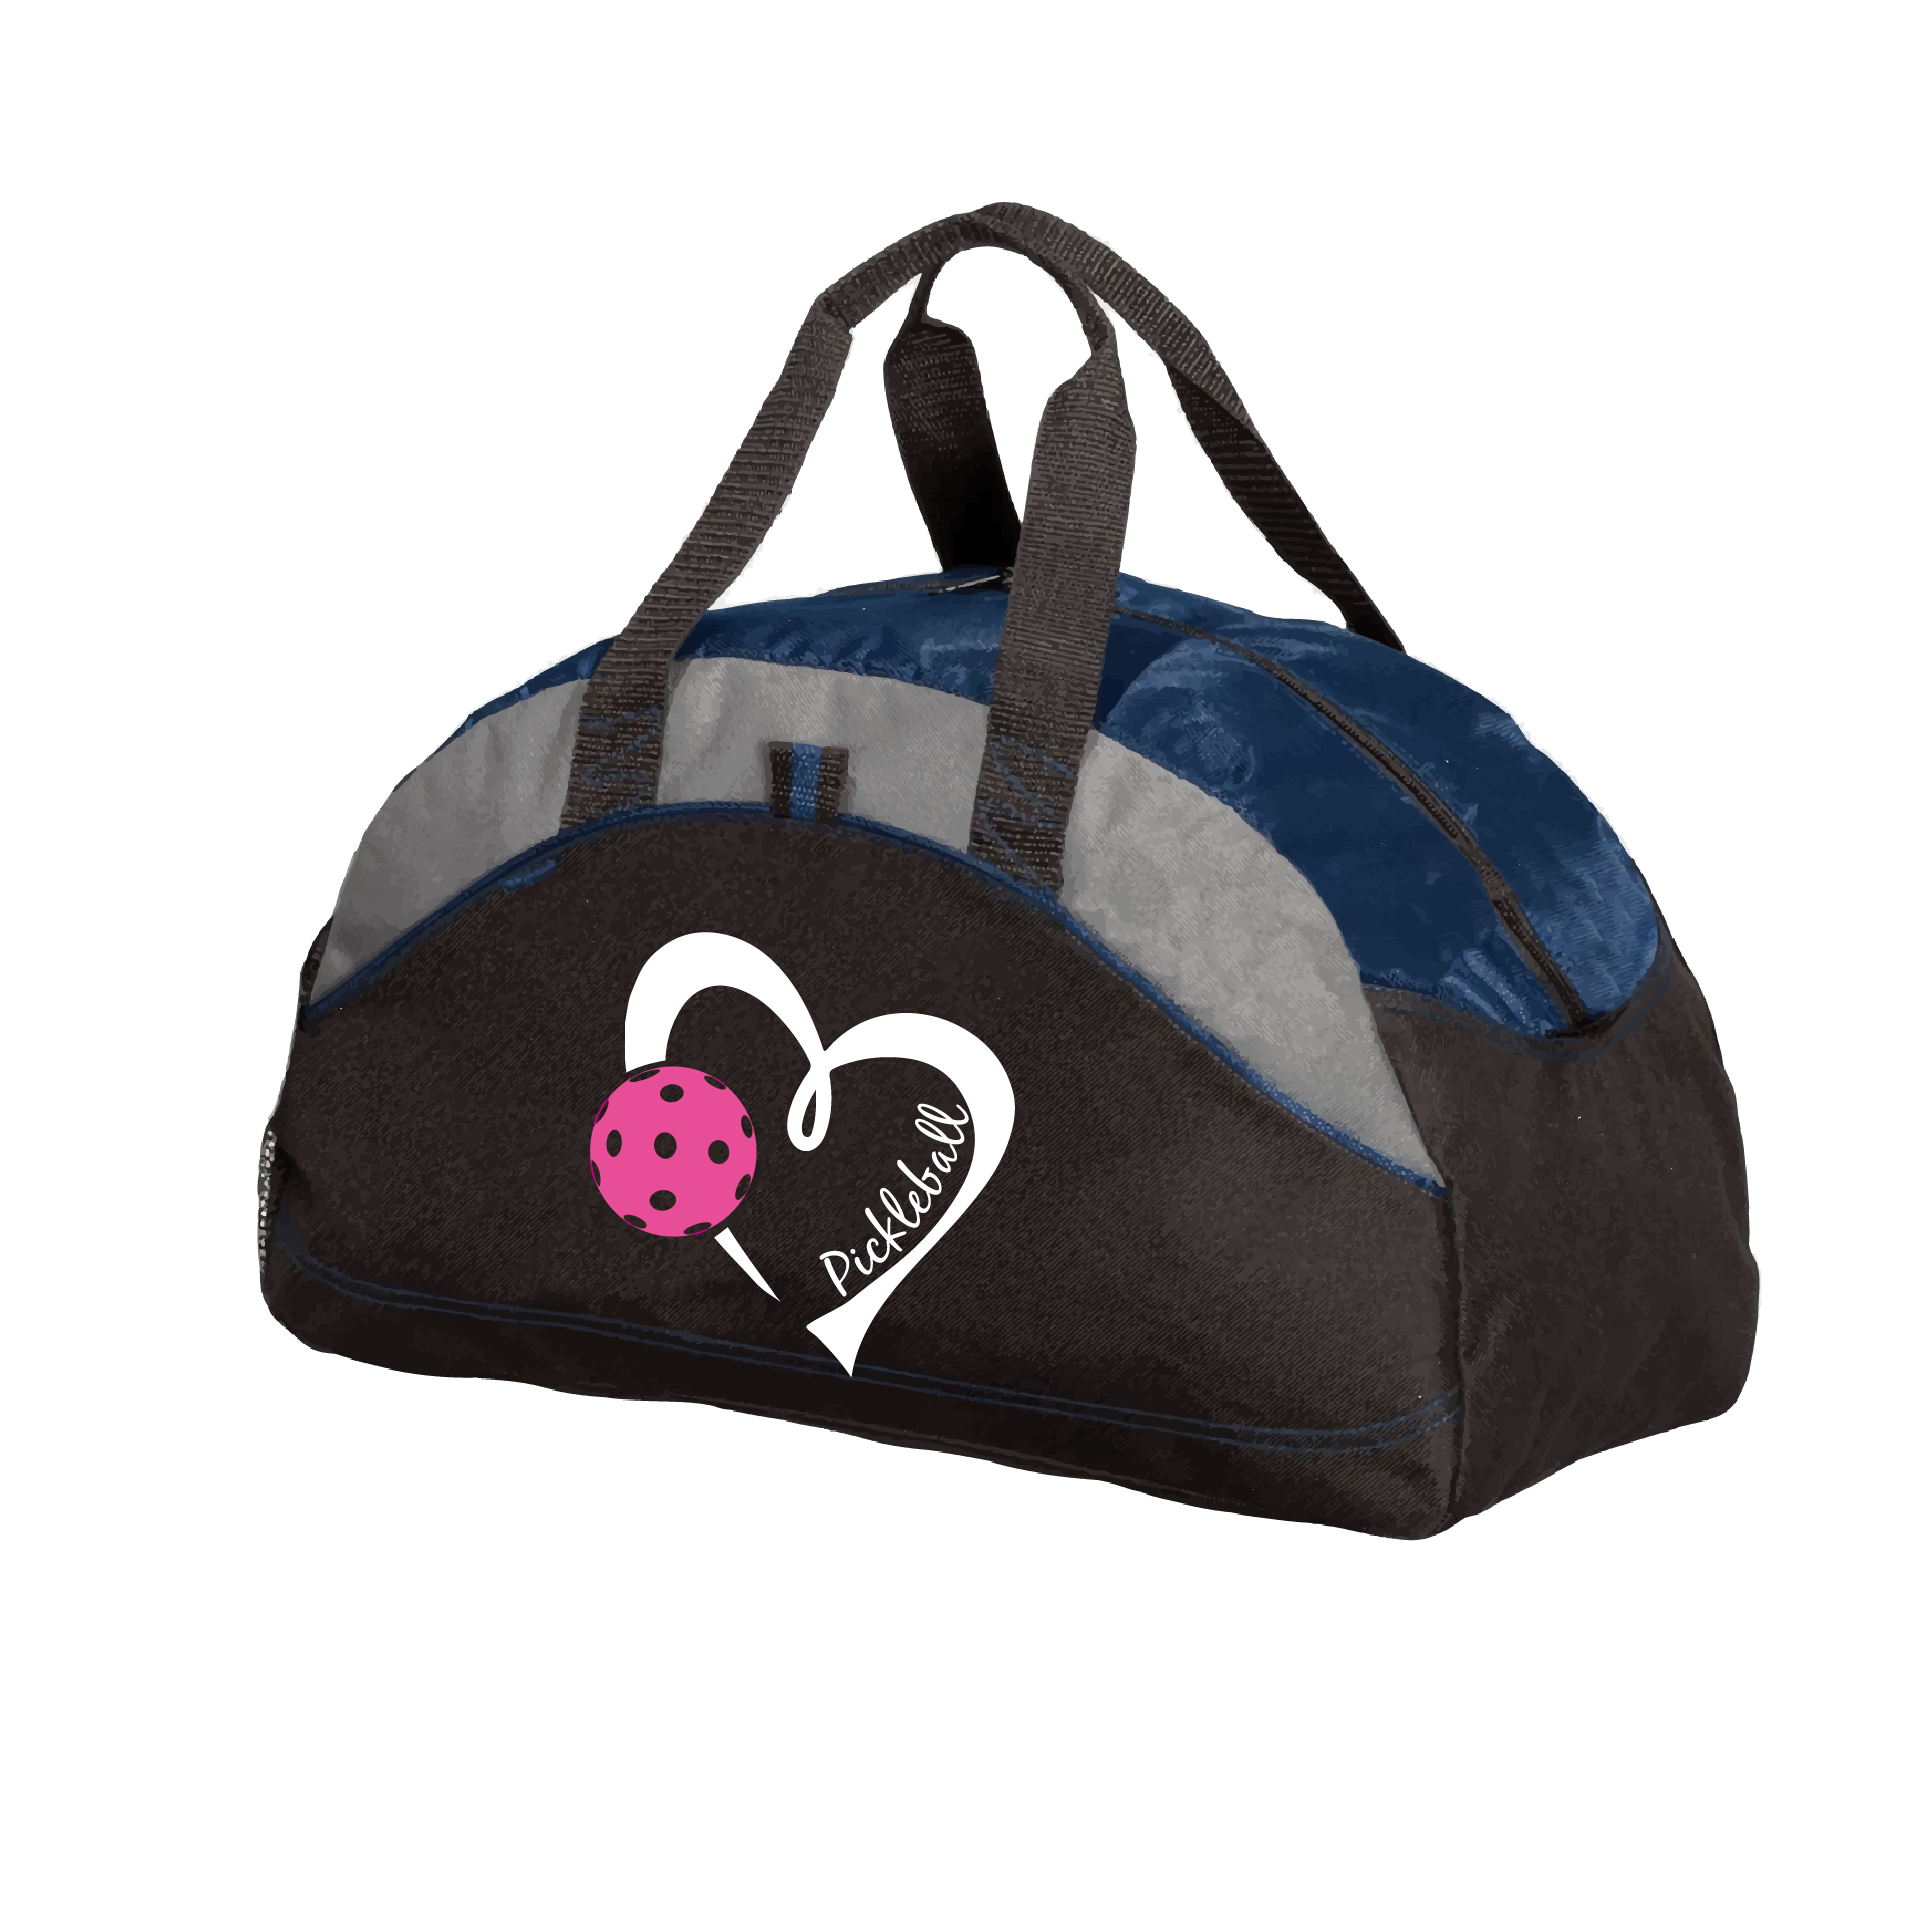 Pickleball Duffel Bag Design: Heart with Pickleball  Carry your gear in comfort and style. This fun pickleball duffel bag is the perfect accessory for all pickleball players needing to keep their gear in one place. This medium sized duffel tote is ideal for all your pickleball activities. The large center compartment allows for plenty of space and the mesh end pocket is perfect for holding a water bottle.